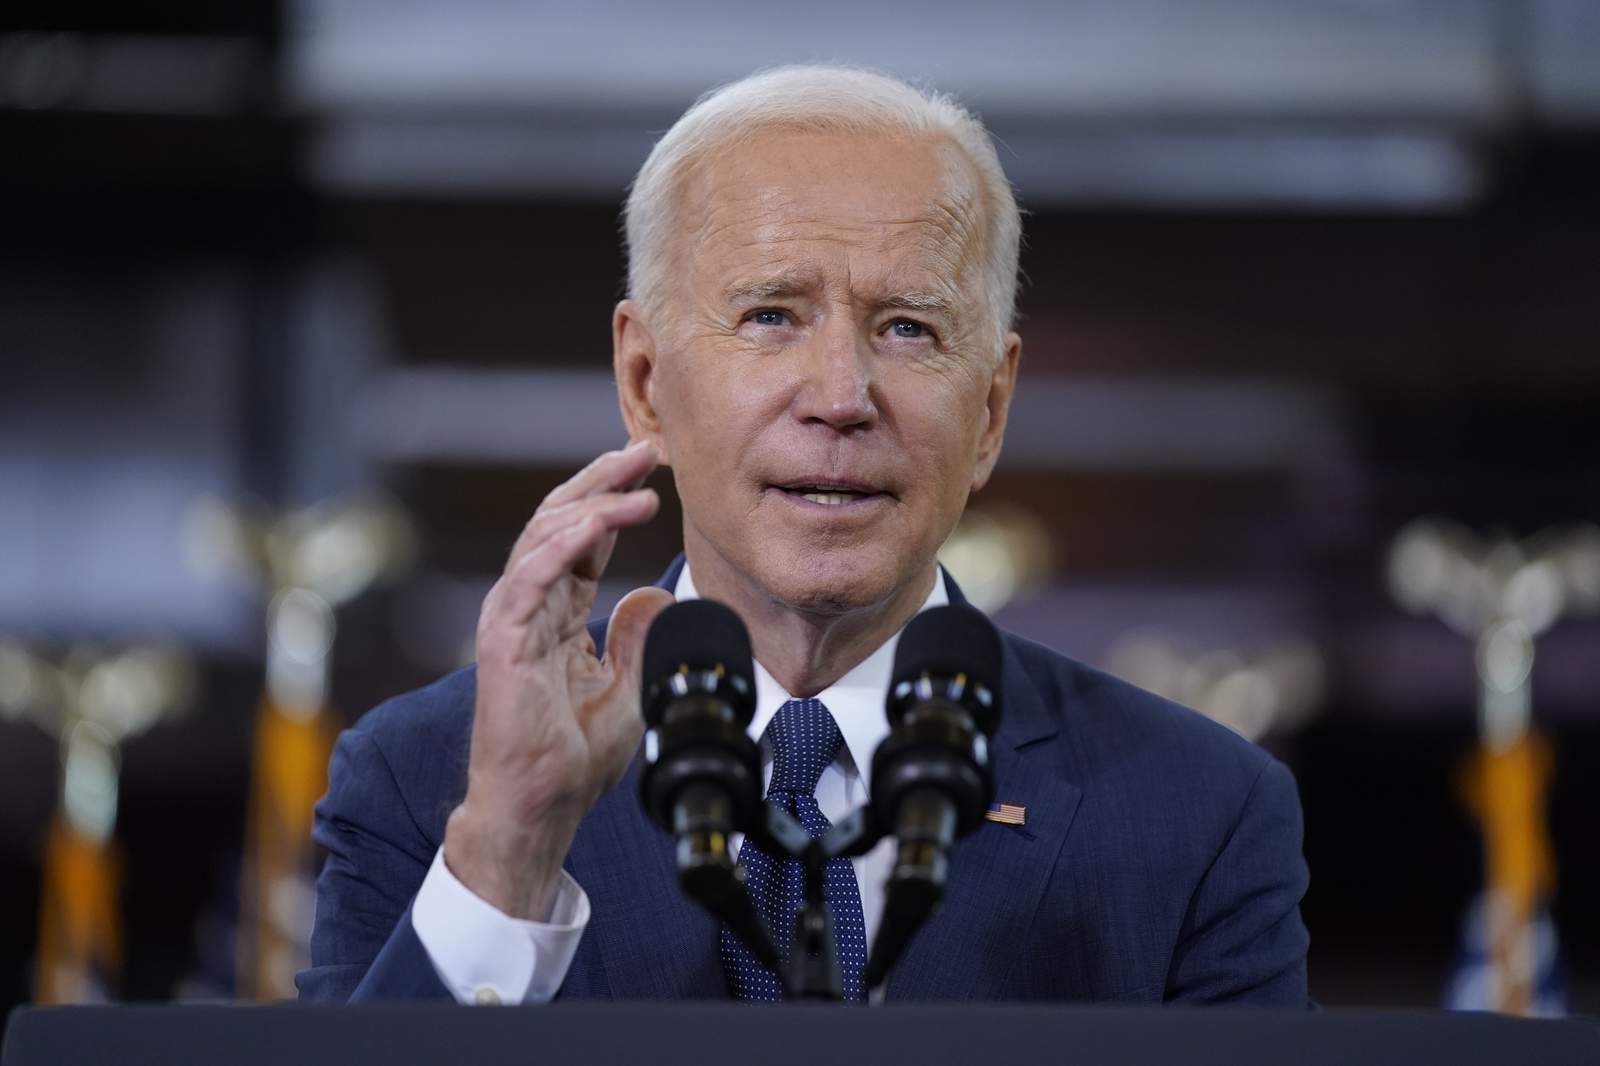 Aiming big, Biden is looking to restore faith in government